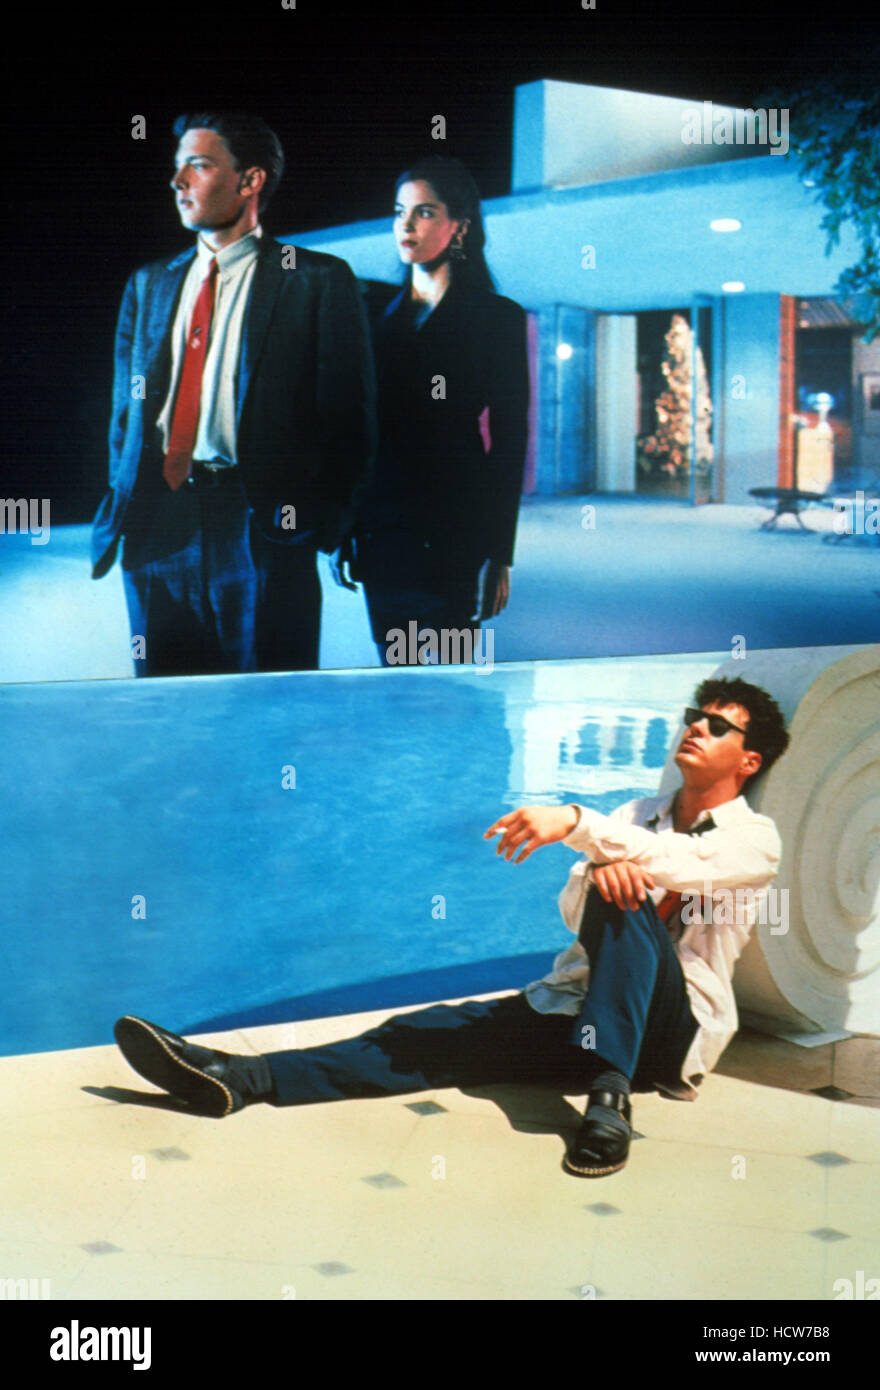 Less Than Zero Filming Locations